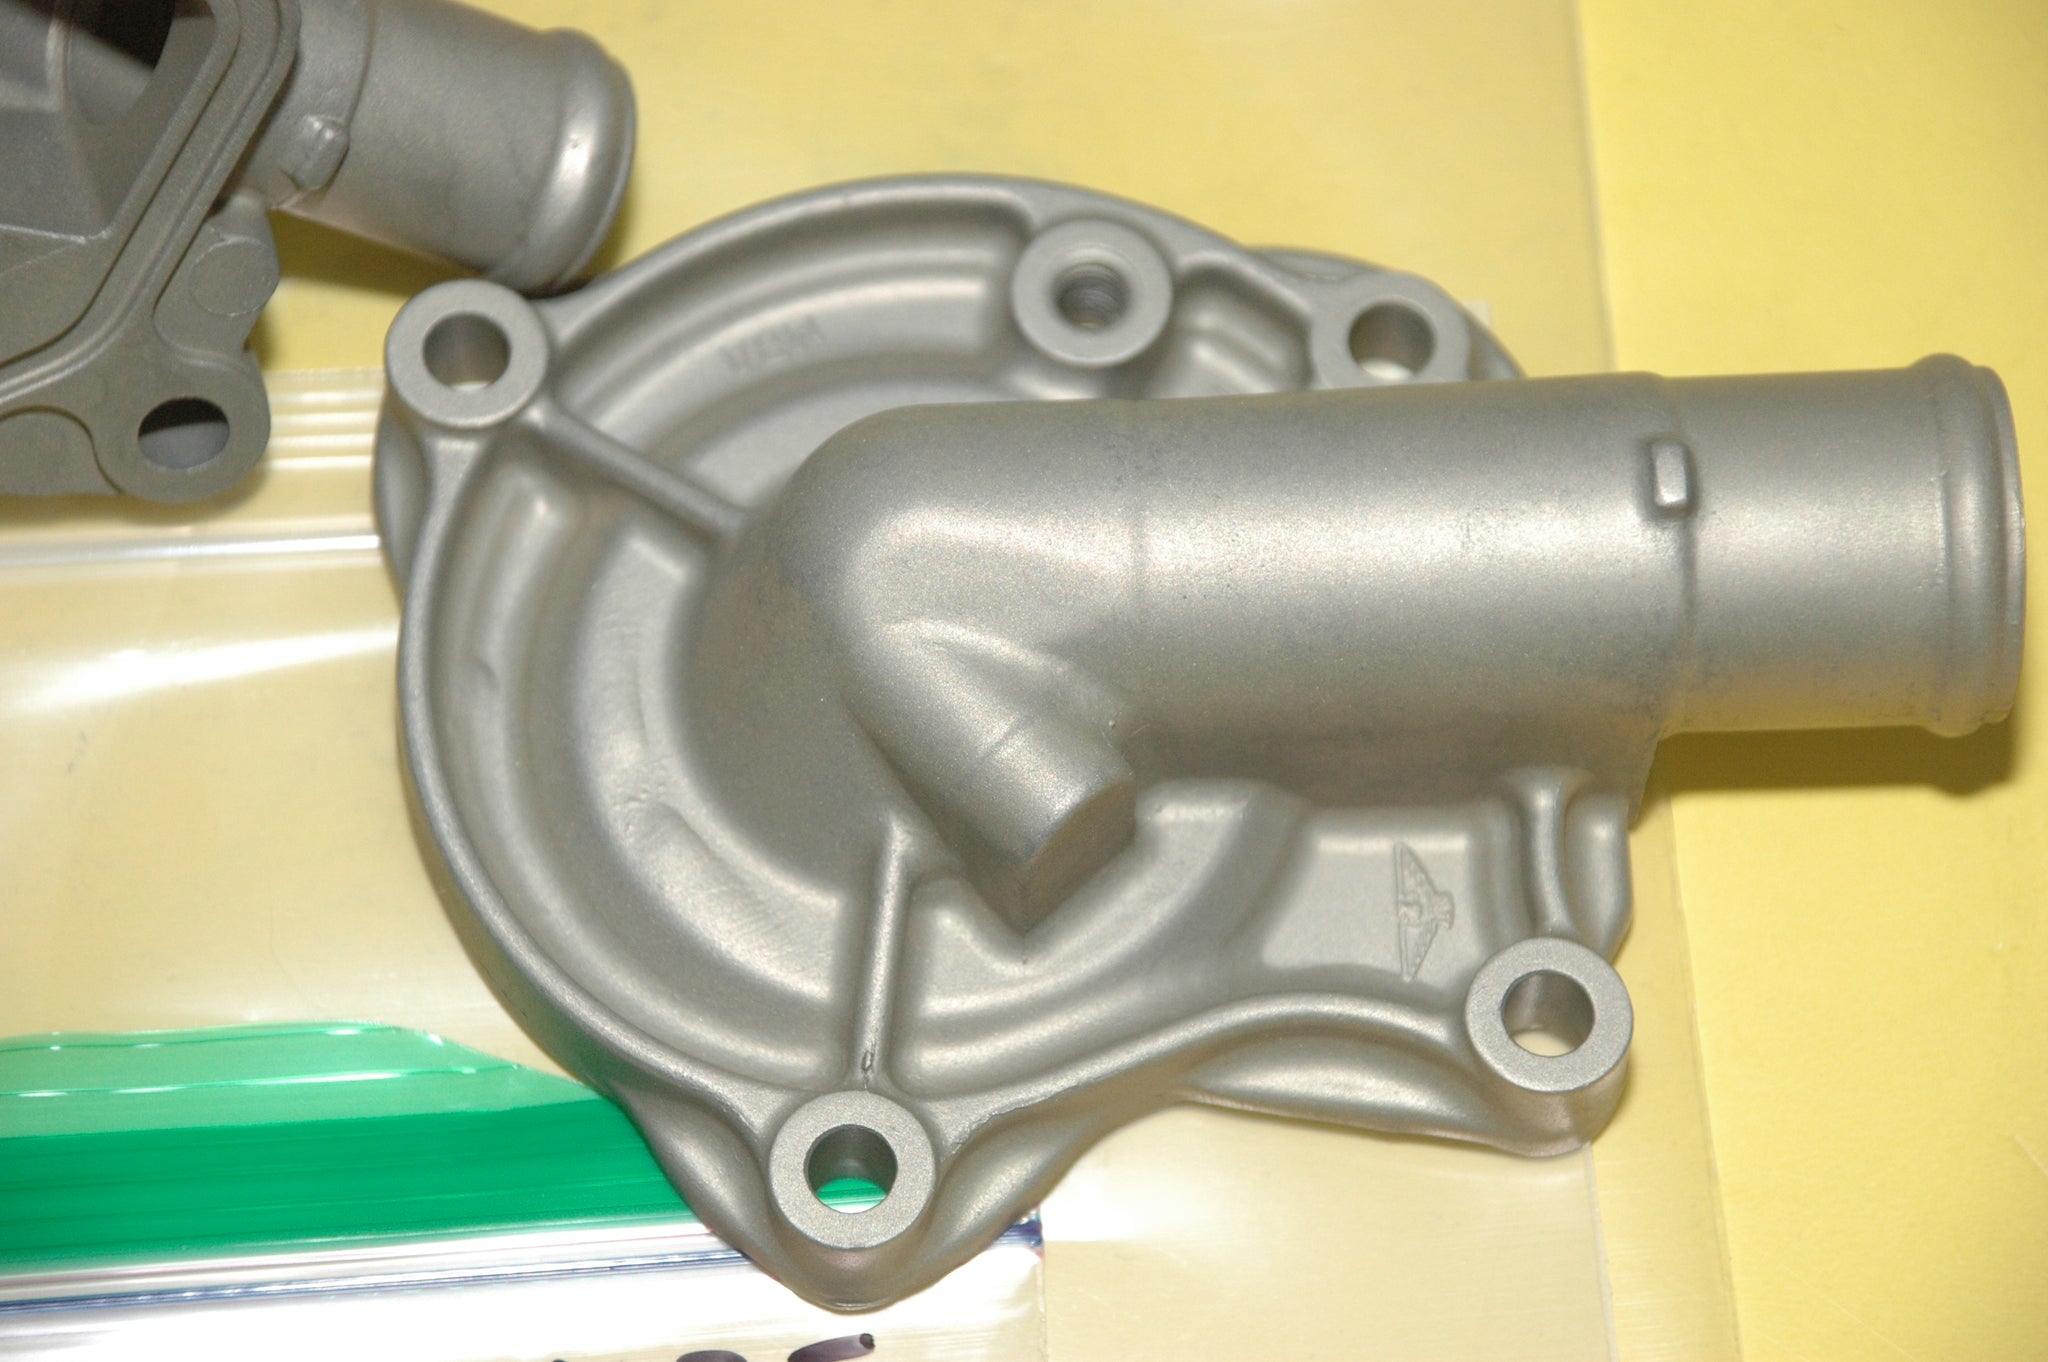 Honda P/N 19200-MEG-000, 04-08 VT750C With Cover,Water Pump, OH $25 core w/exch